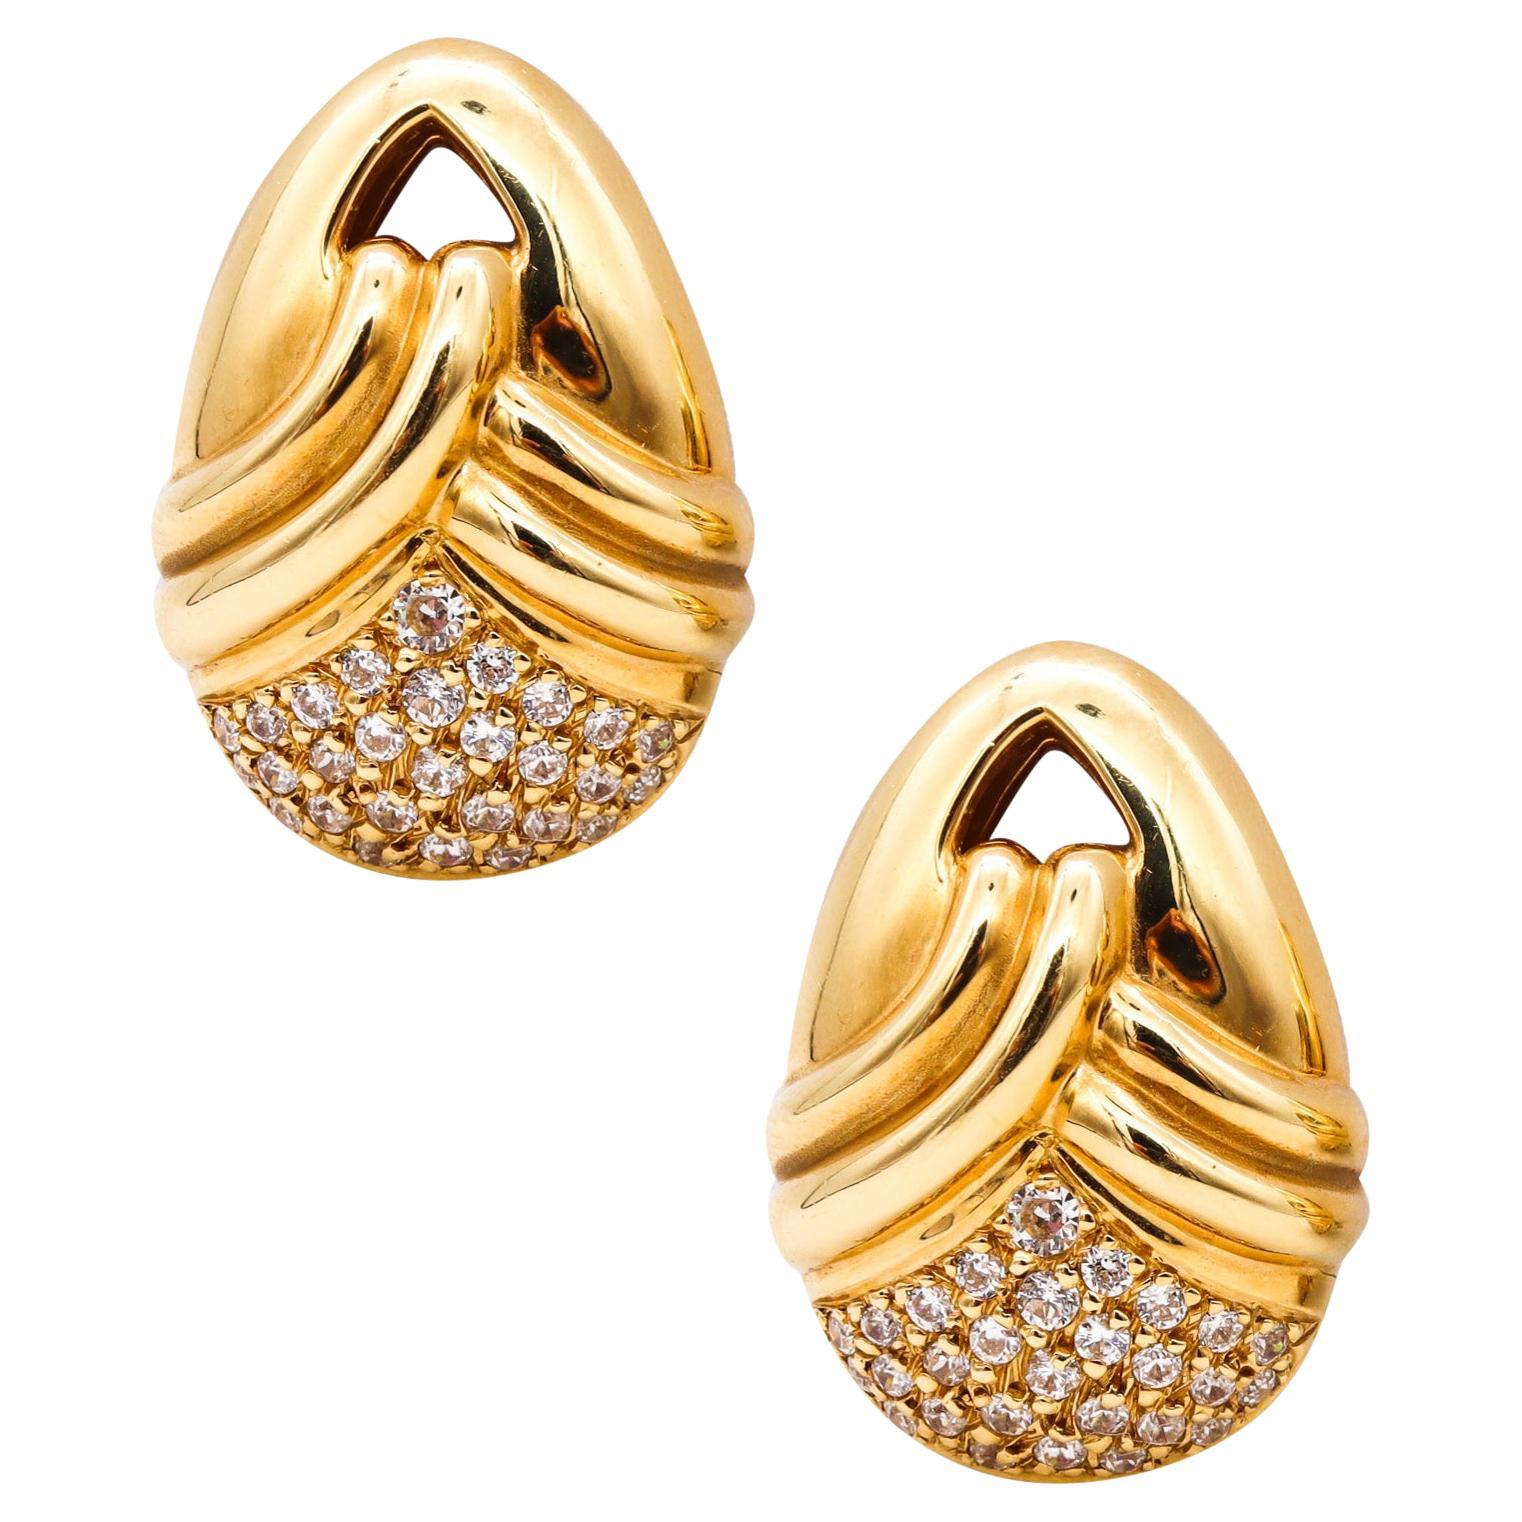 Michael Gates Drapery Clips Earrings Solid 18kt Yellow Gold 1.68 Cts in Diamonds